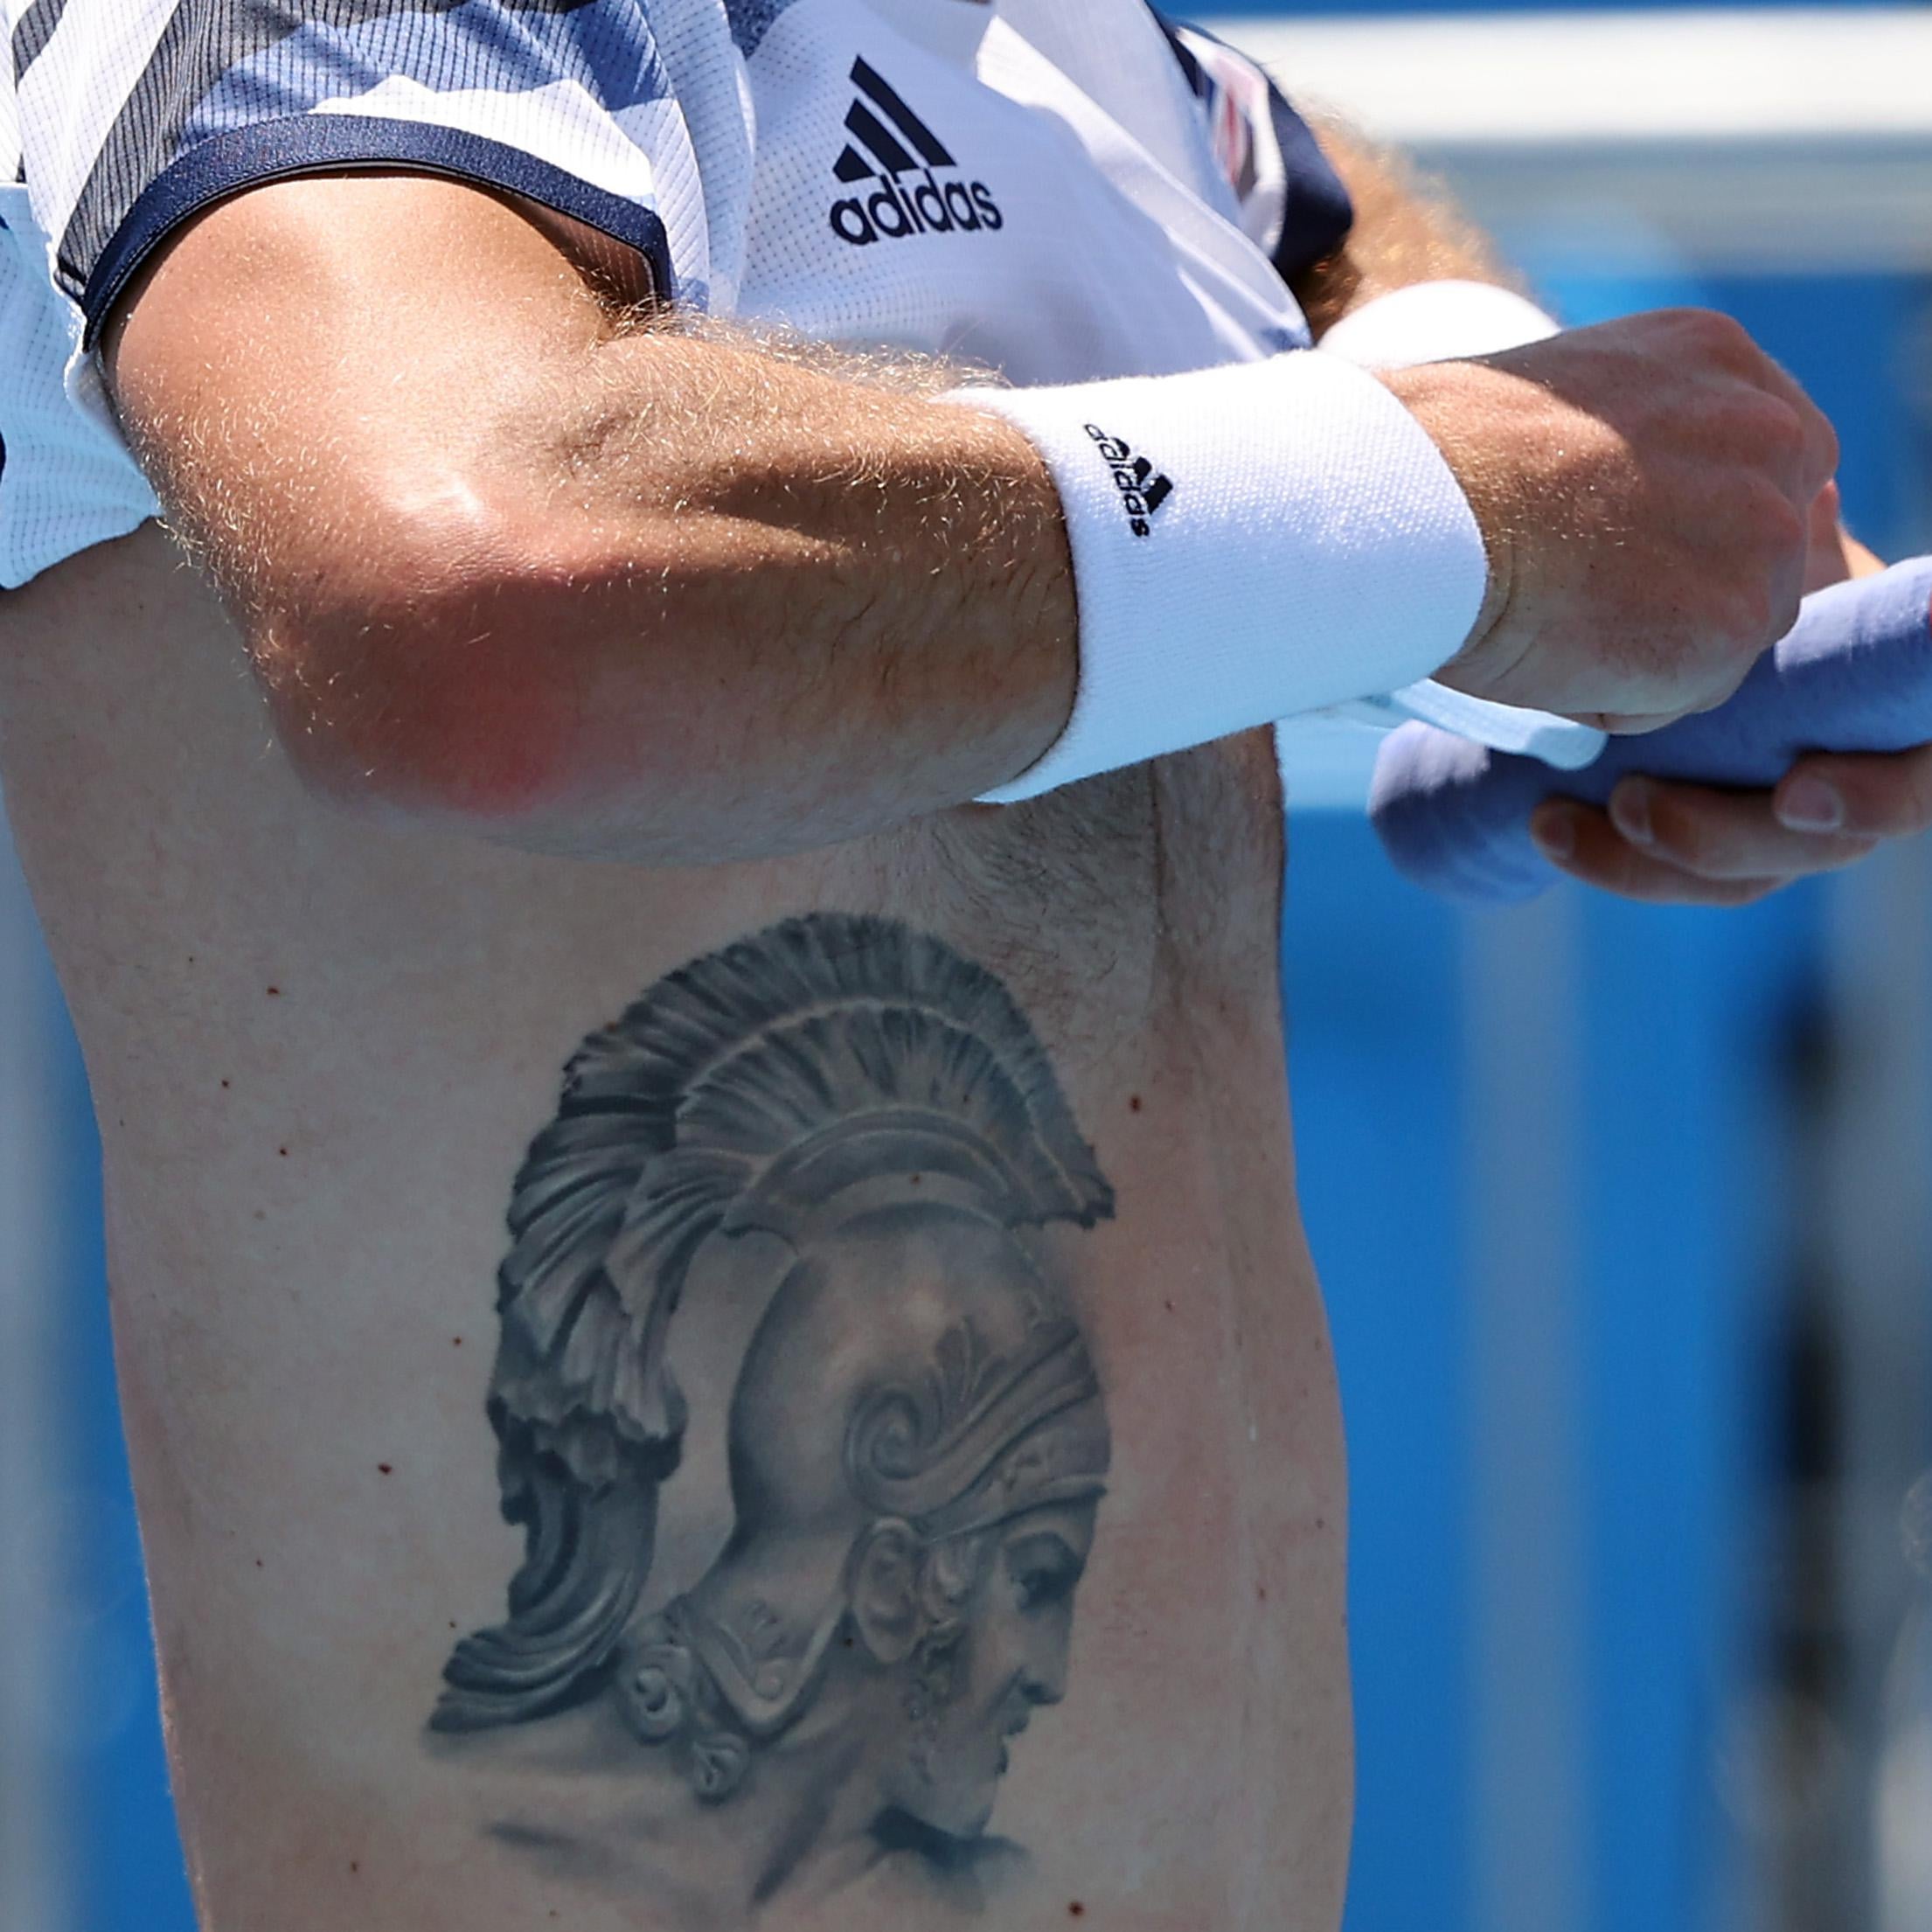 A man in Adidas wristband and holding a purple tennis-racket handle in his left hand lifts up his Adidas shirt, revealing the Achilles-in-helmet tattoo